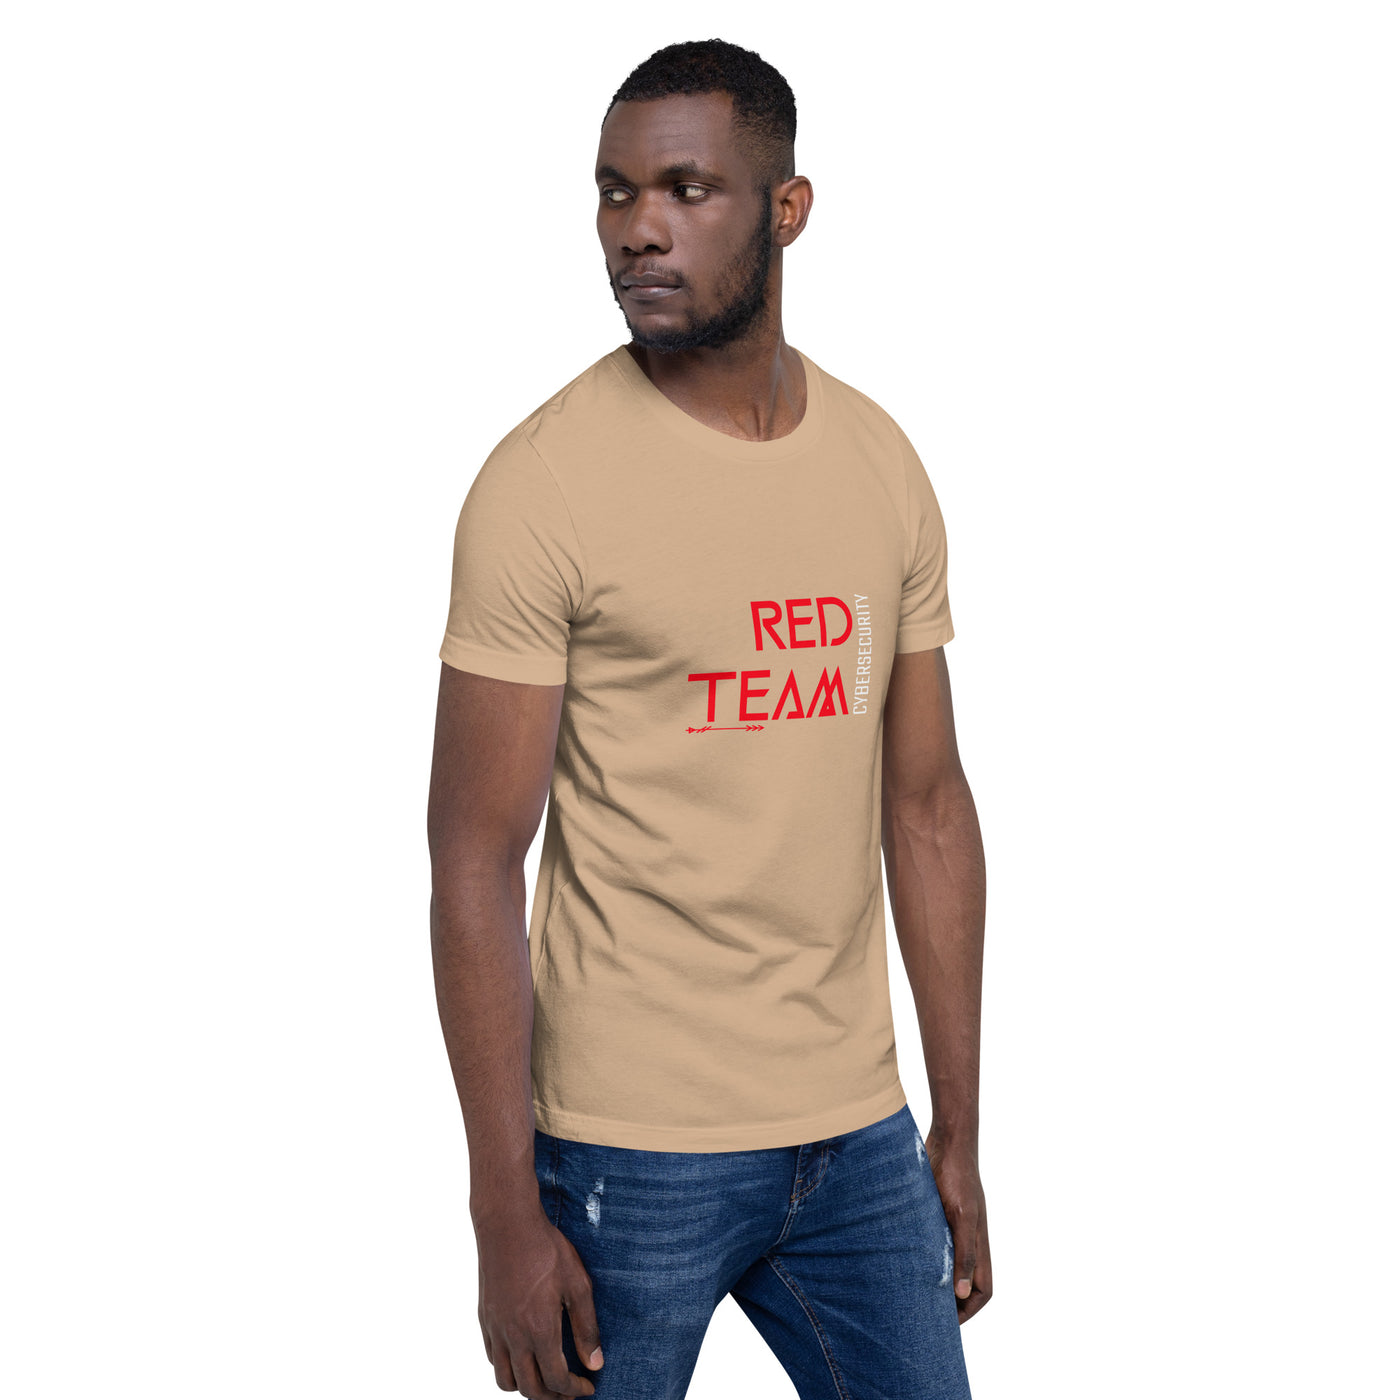 Cyber Security Red Team V4 - Unisex t-shirt